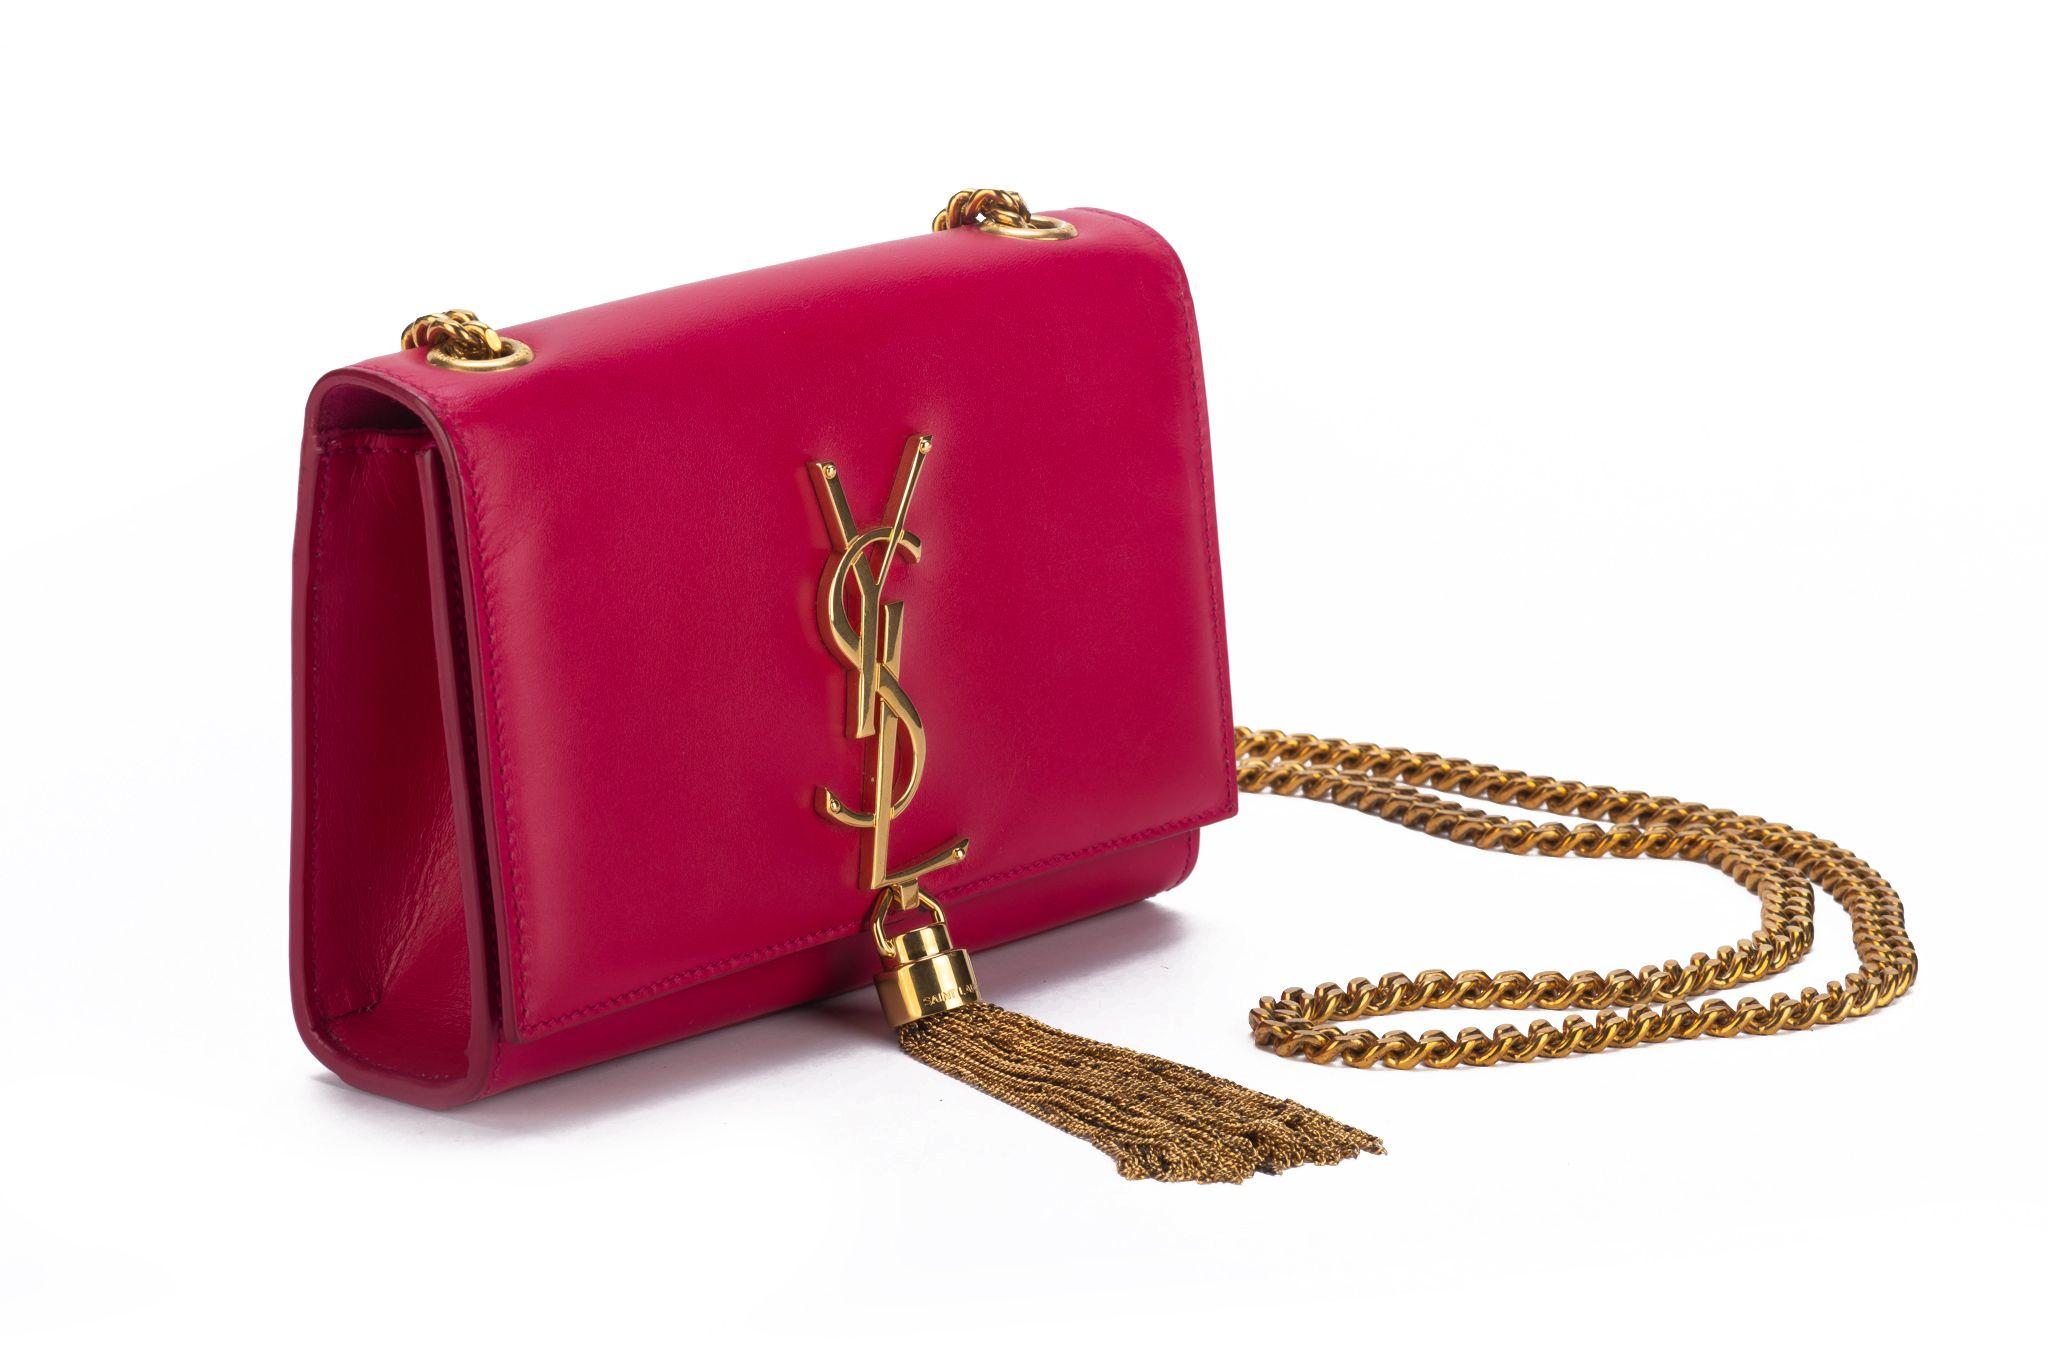 Yves Saint Laurent preloved fuchsia leather cross body bag with gold tassel and chain. Shoulder drop 23”. Comes with booklet and original dust cover.